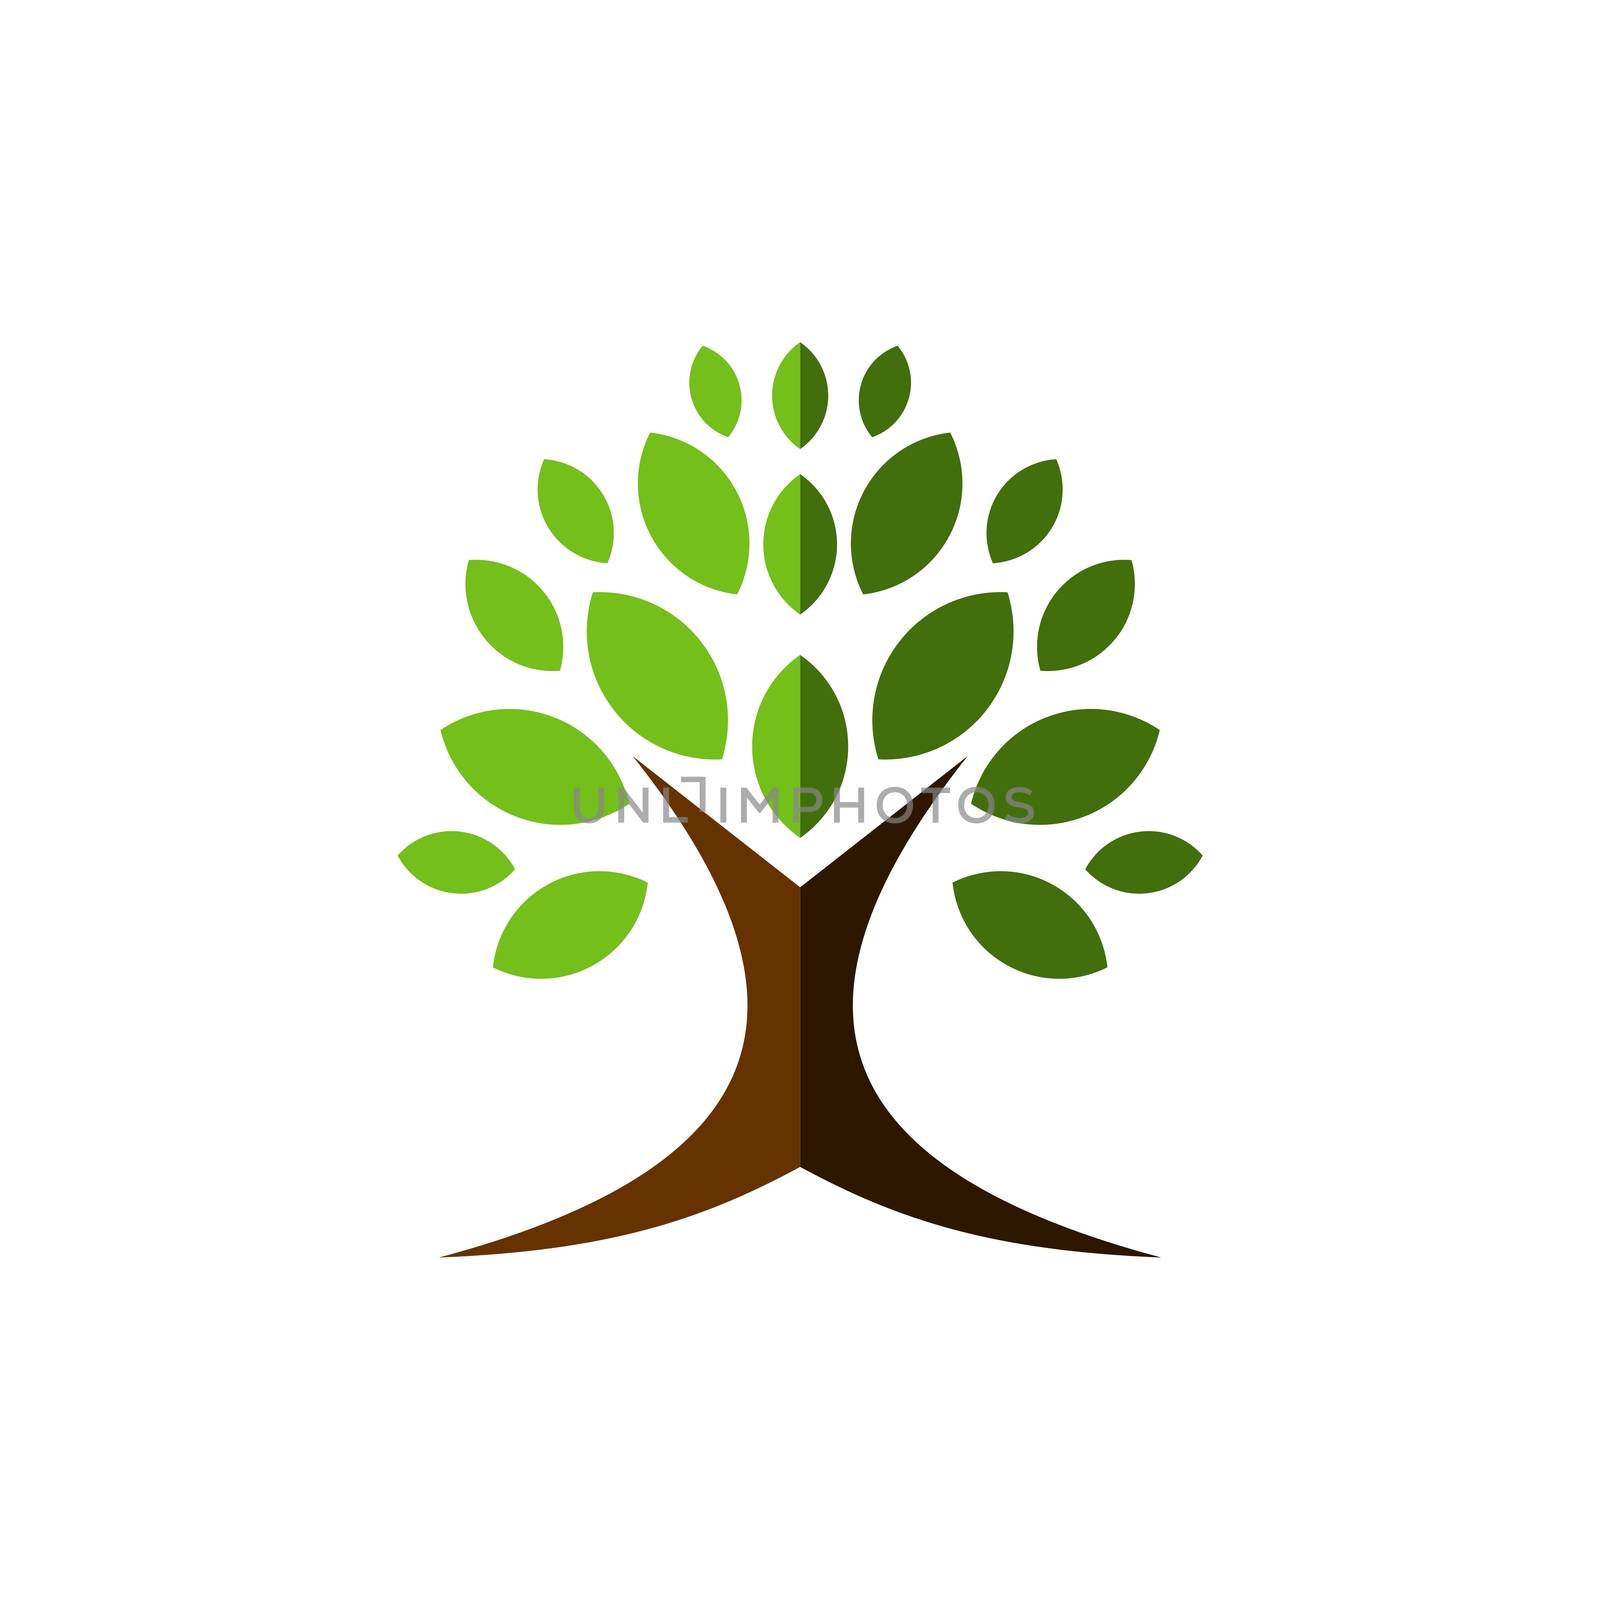 Tree with Green Leaves Logo Template Illustration Design. Vector EPS 10.